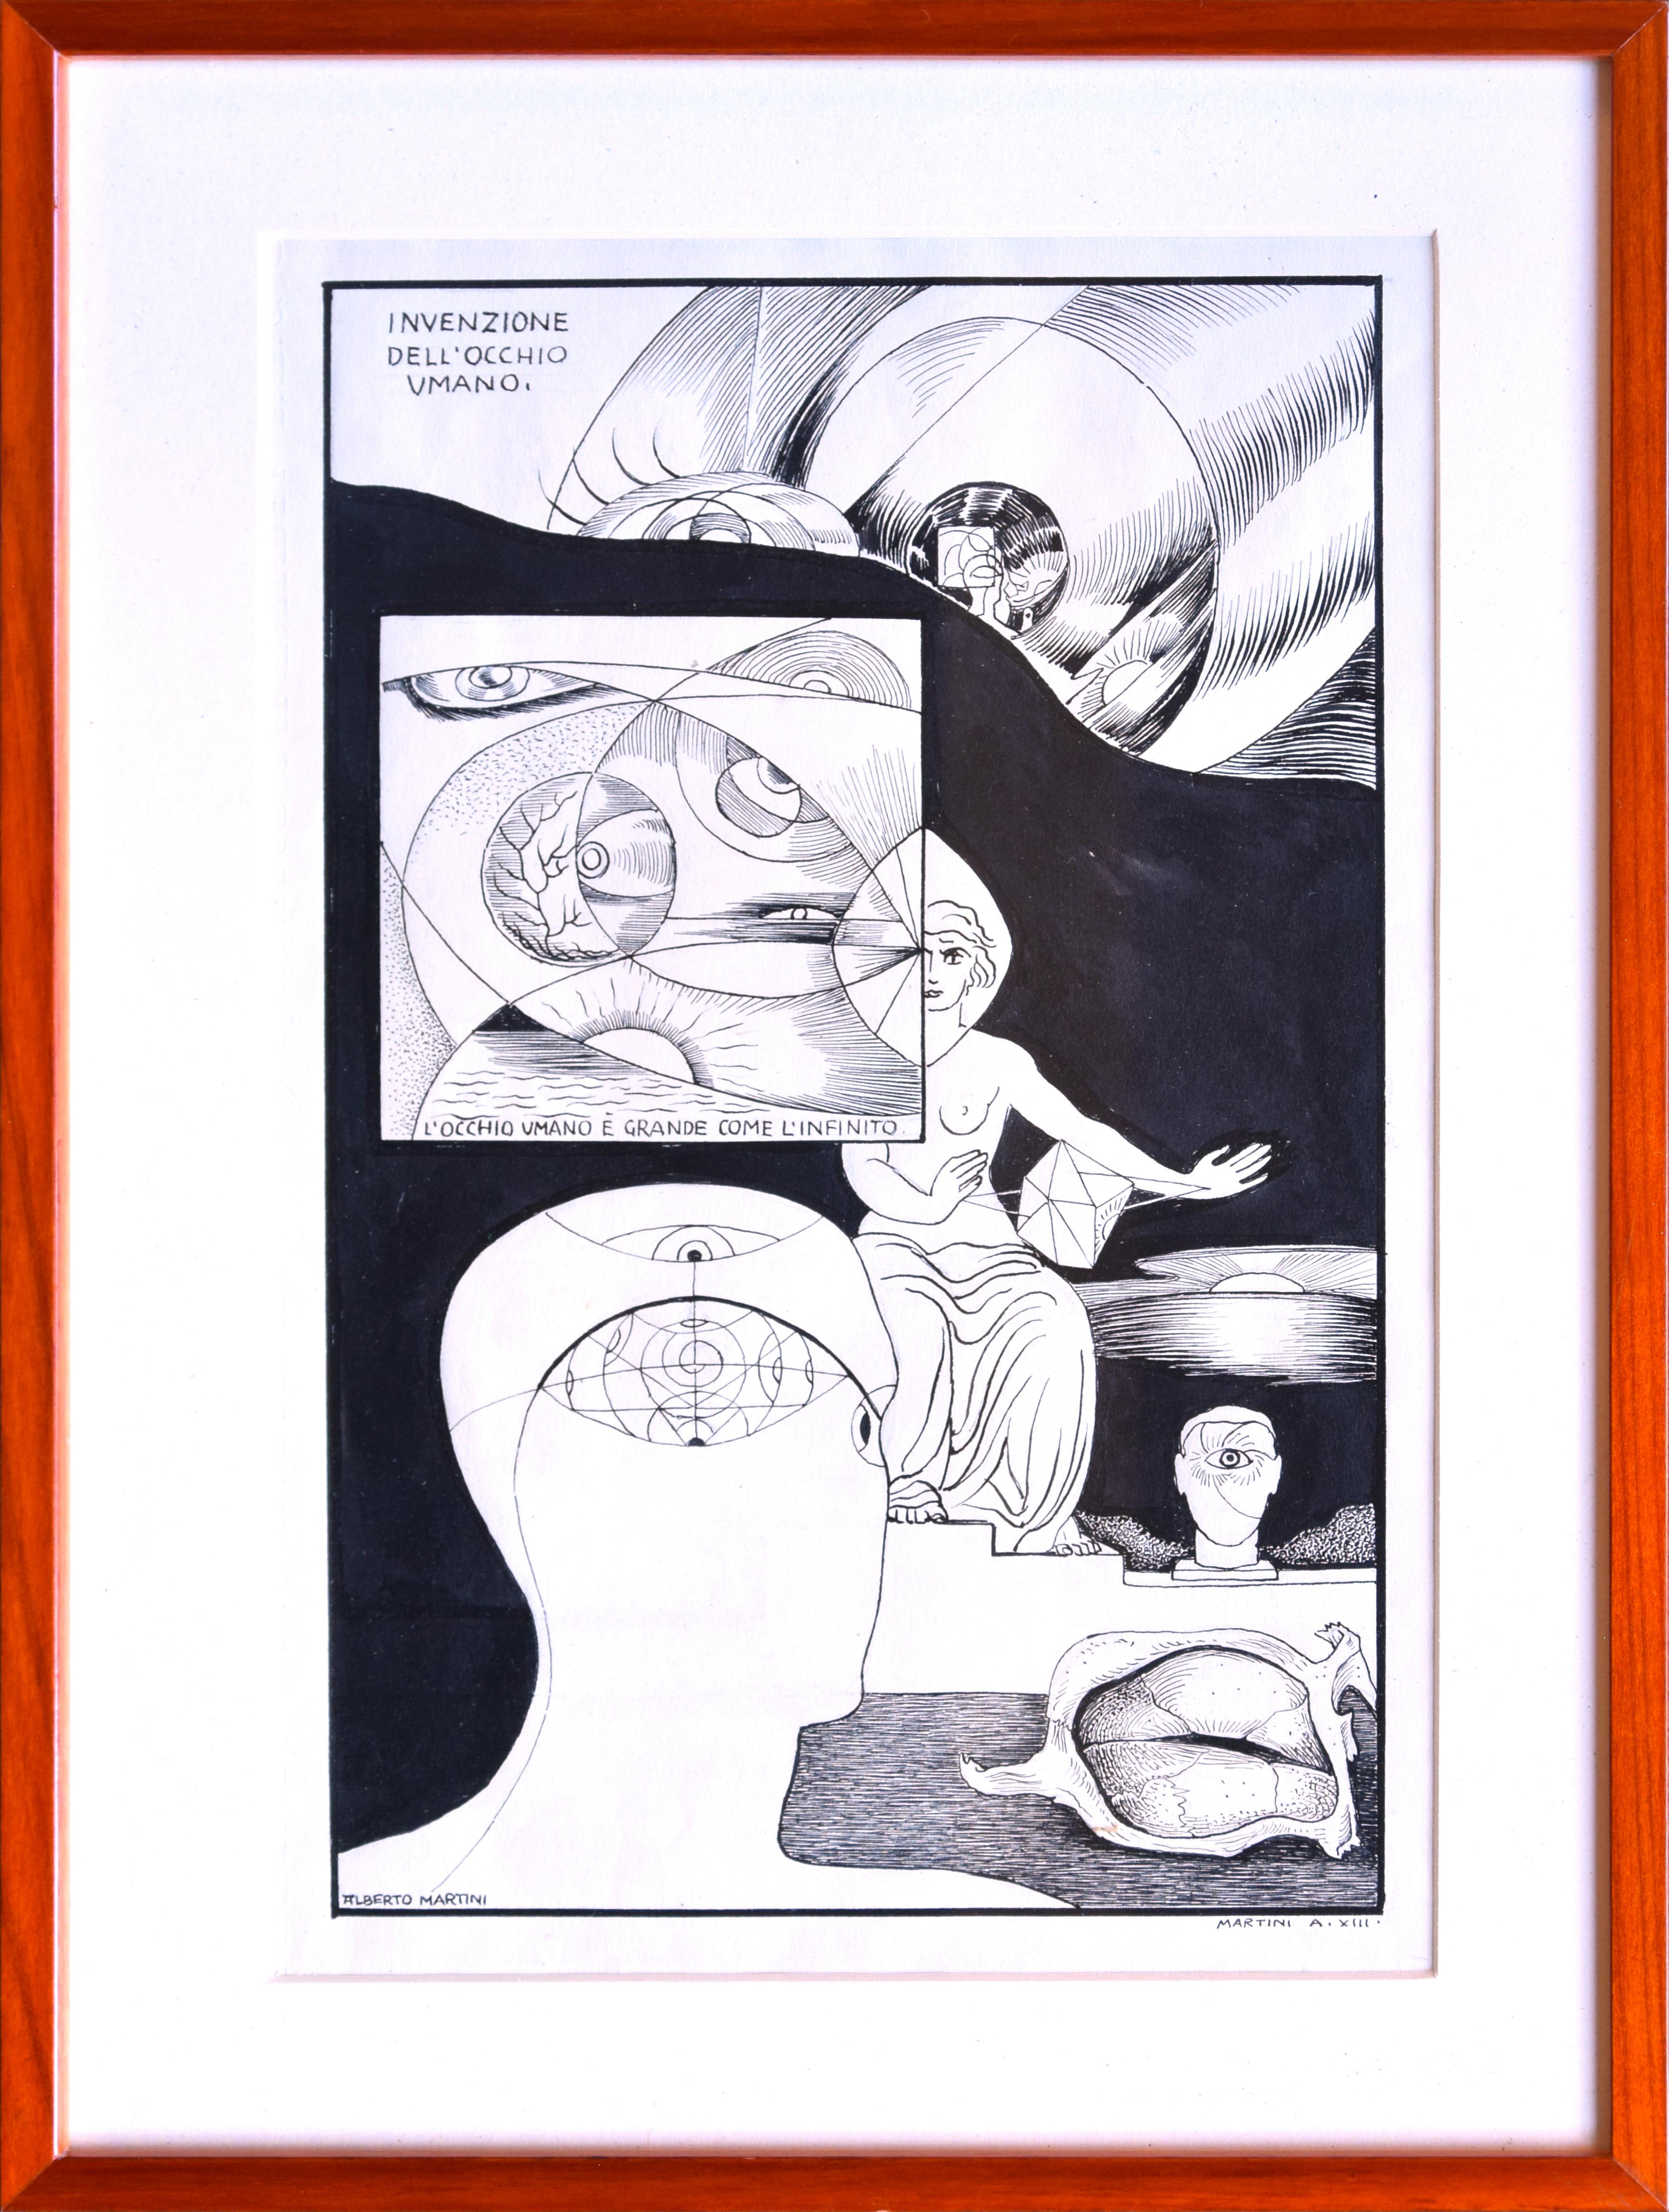 Invention of the Human Eye - Original China Ink on Paper by A. Martini - 1935 - Art by Alberto Martini